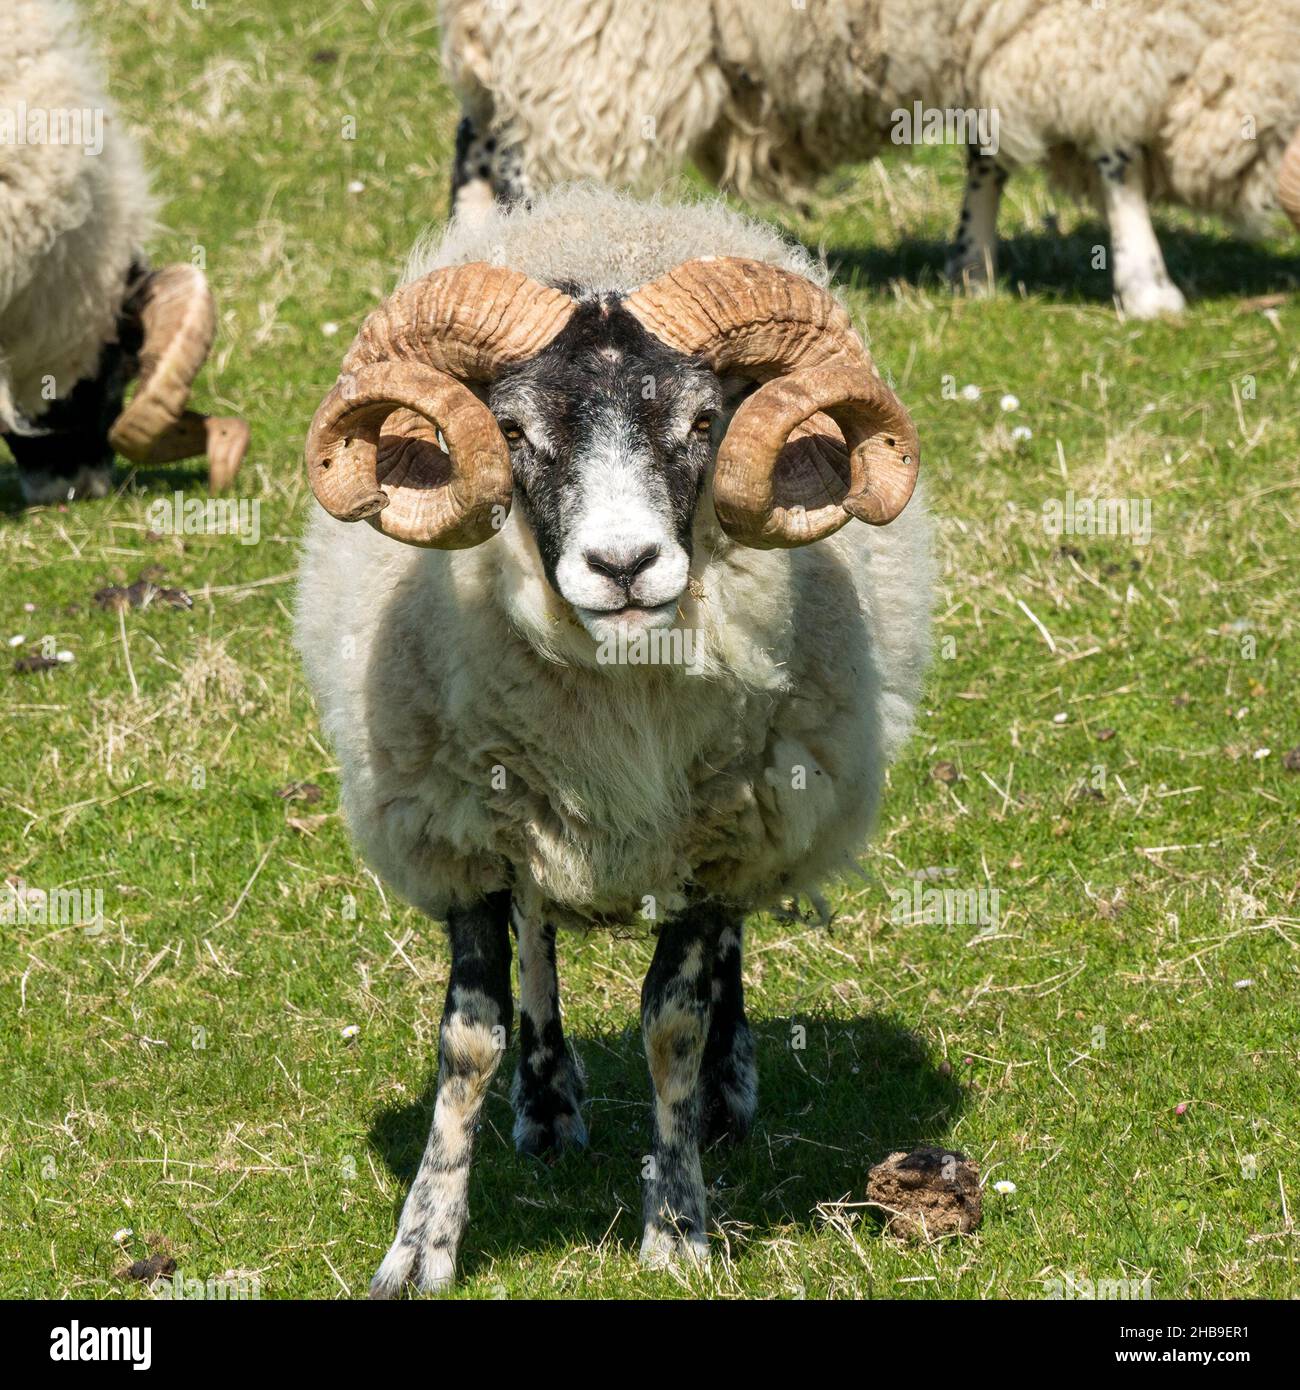 Blackface sheep with large curly horns standing in green grassy field on the Isle of Lewis, Scotland, UK Stock Photo